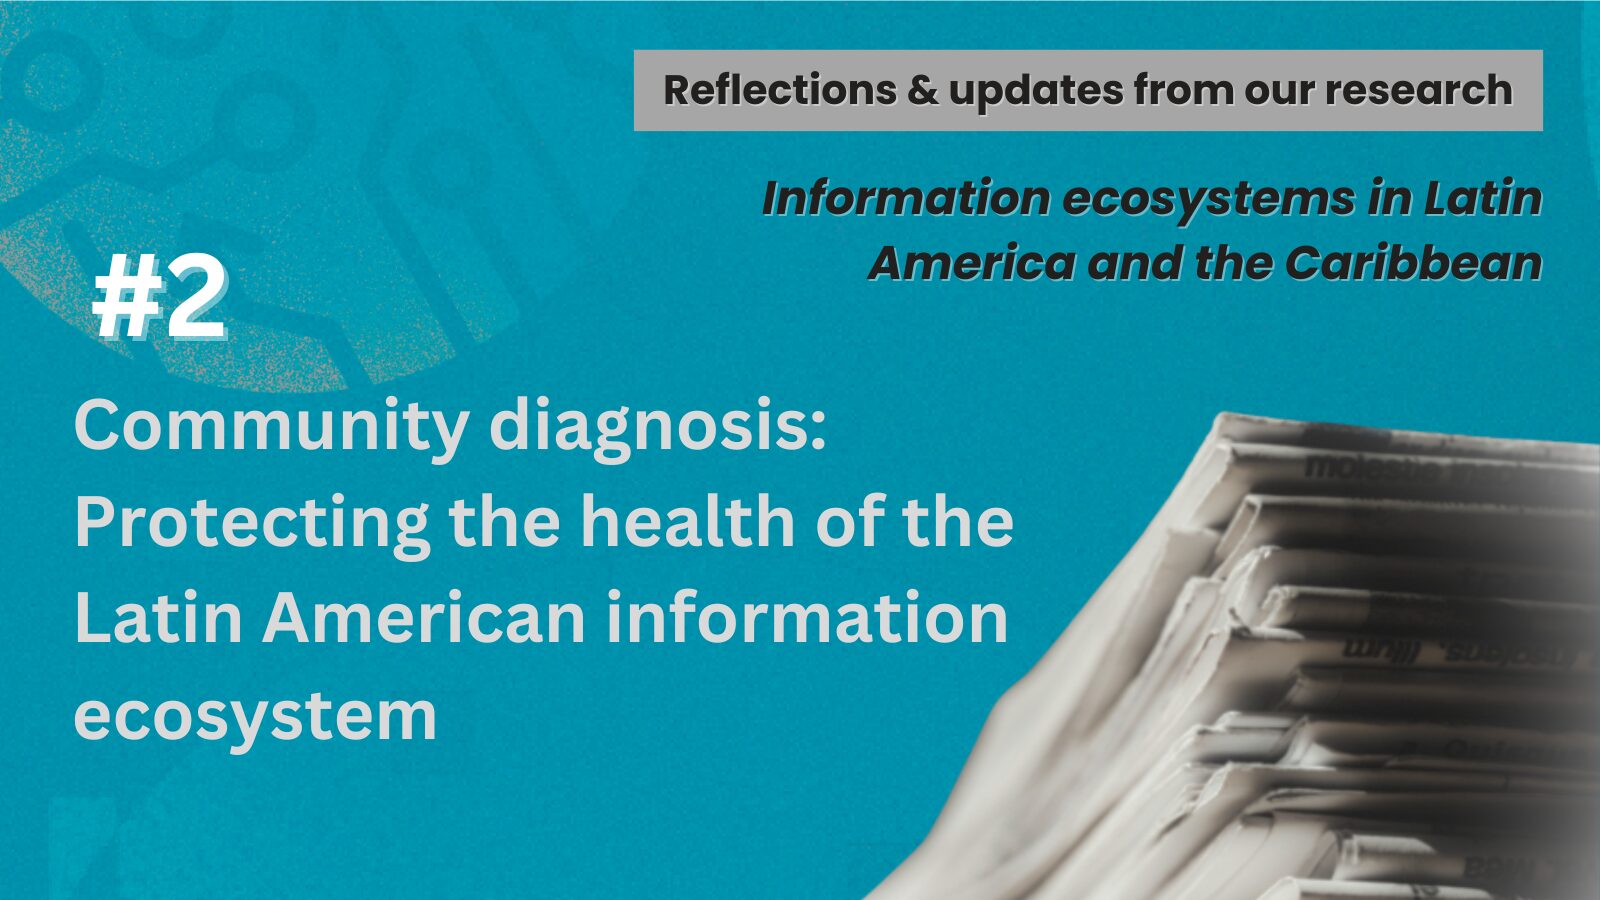 Community diagnosis: Protecting the health of the Latin American Information Ecosystem